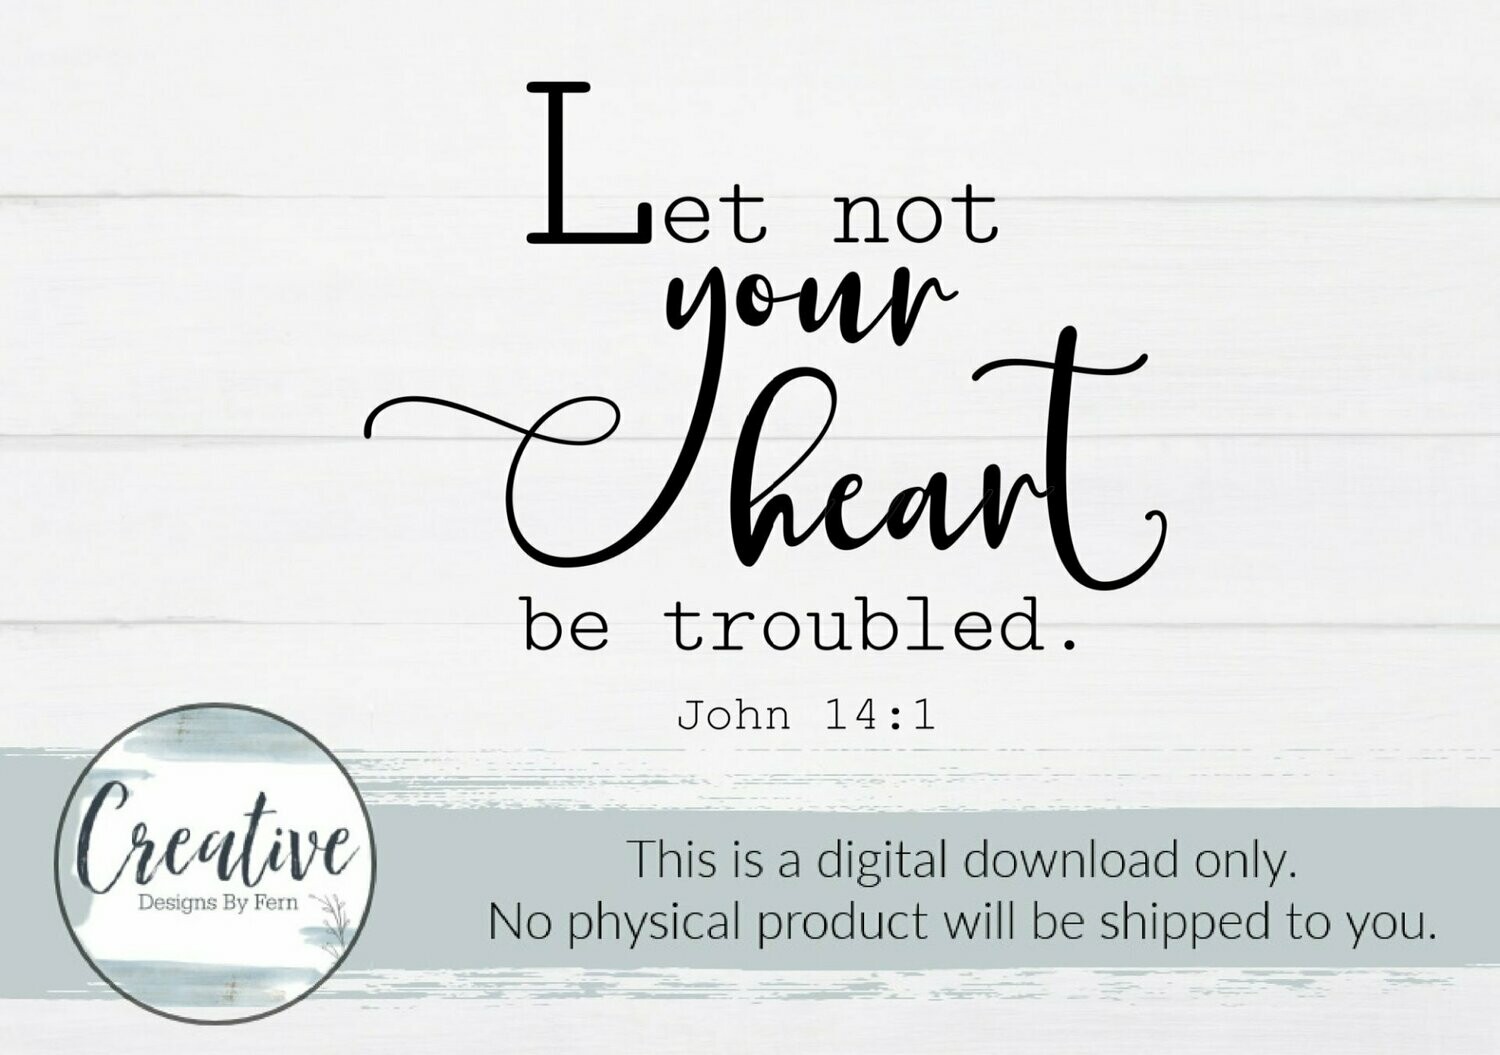 Let Not Your Heart be Troubled (Digital Download)